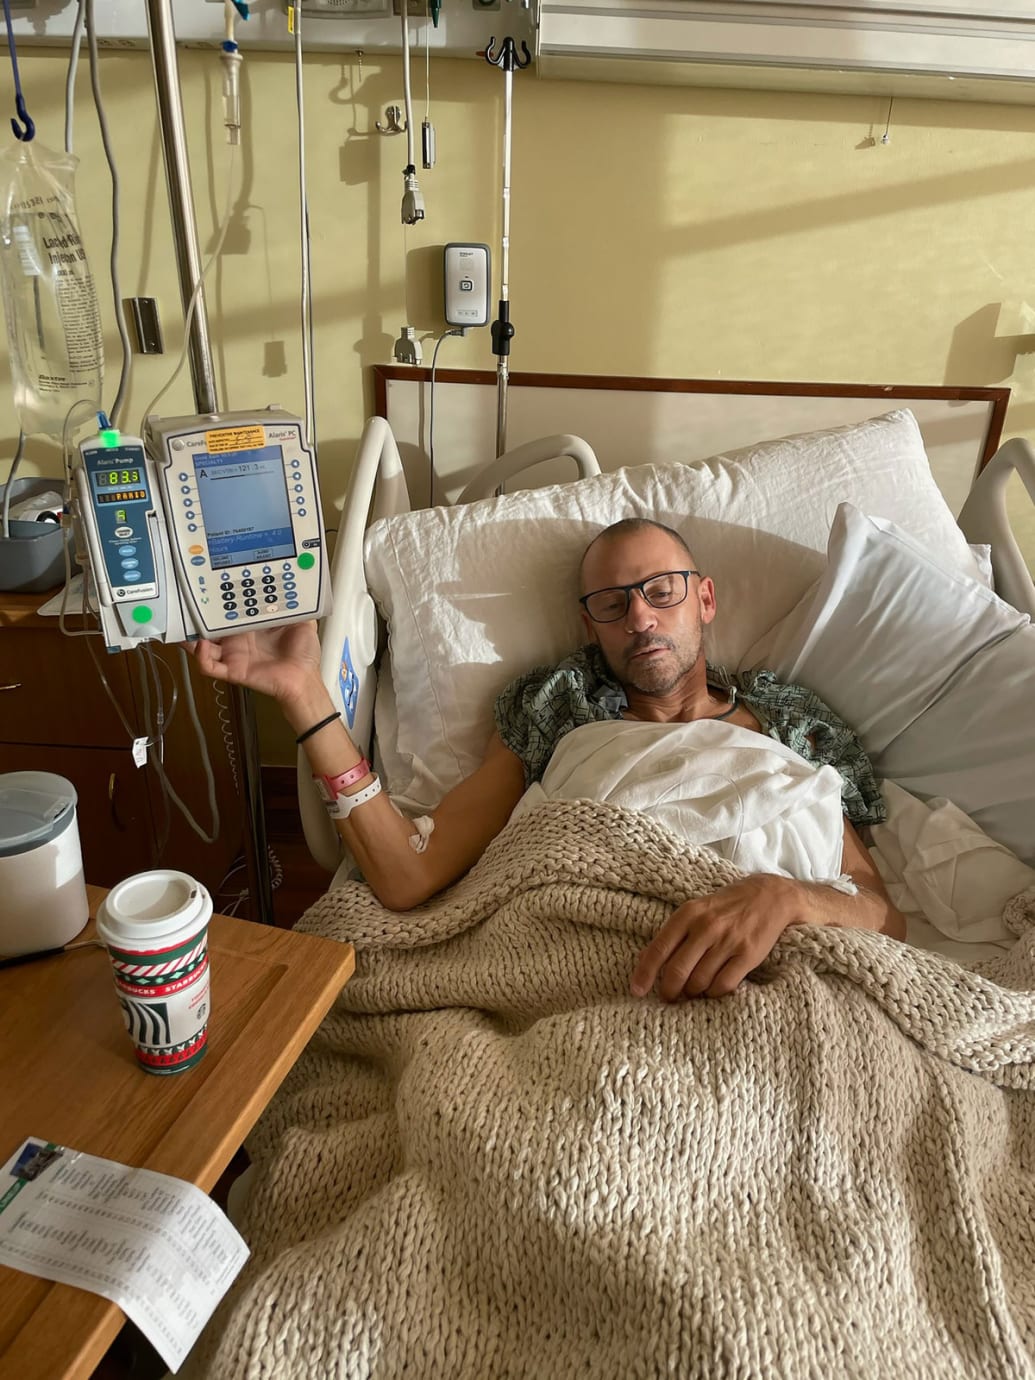 A photo supplied by Eric Lamaze showing him in a hospital bed.